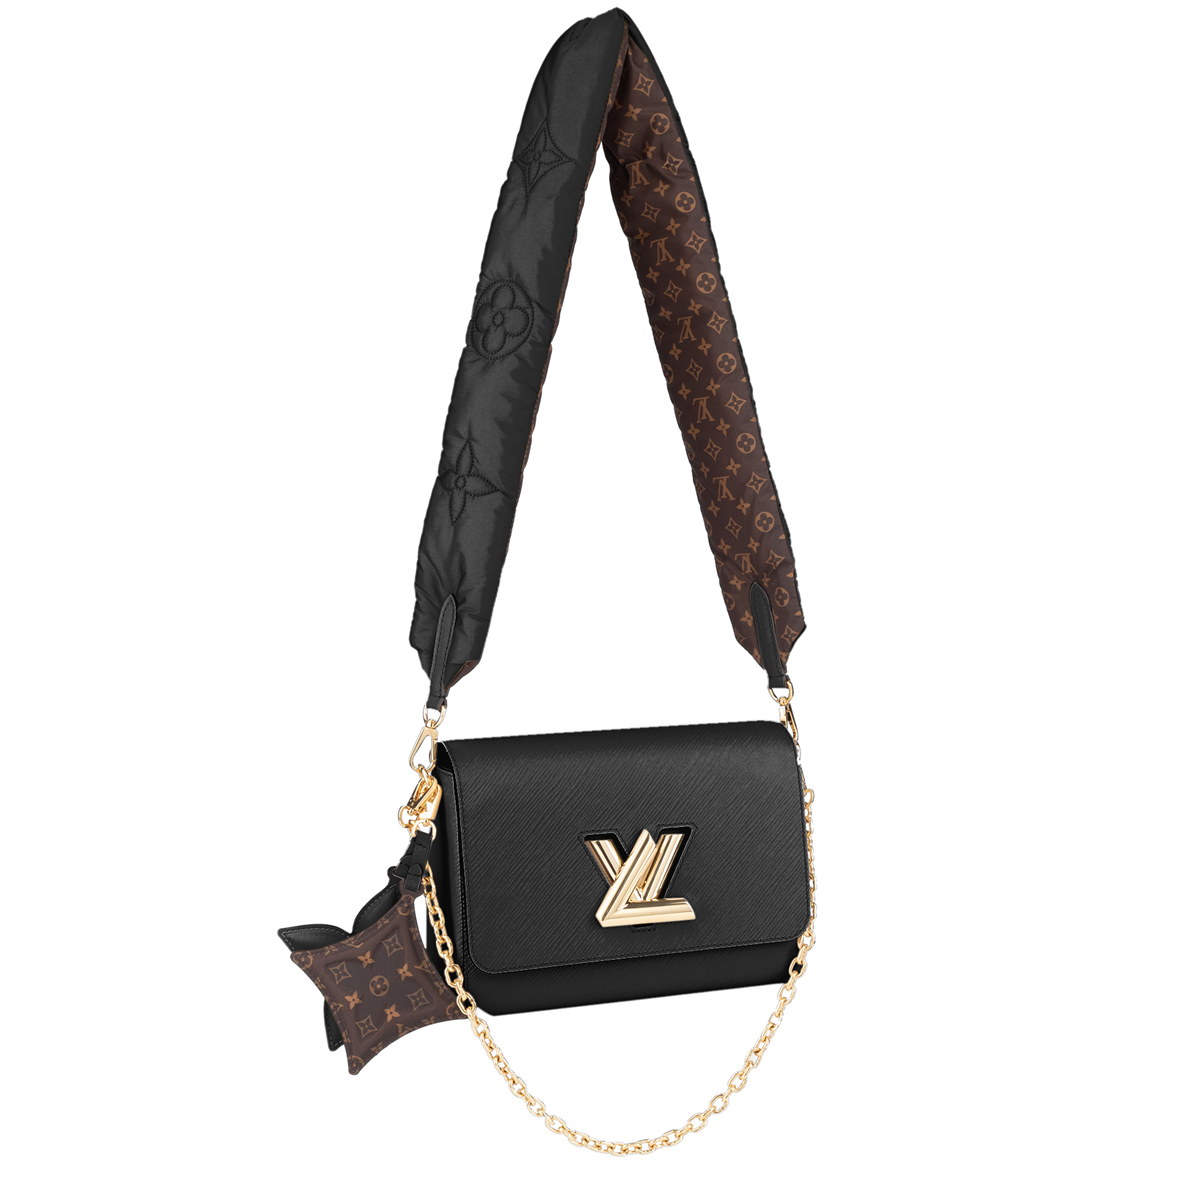 LV_LV PILLOW_TWIST BAG IN EPI LEATHER IN RECYCLED NYLON (1)